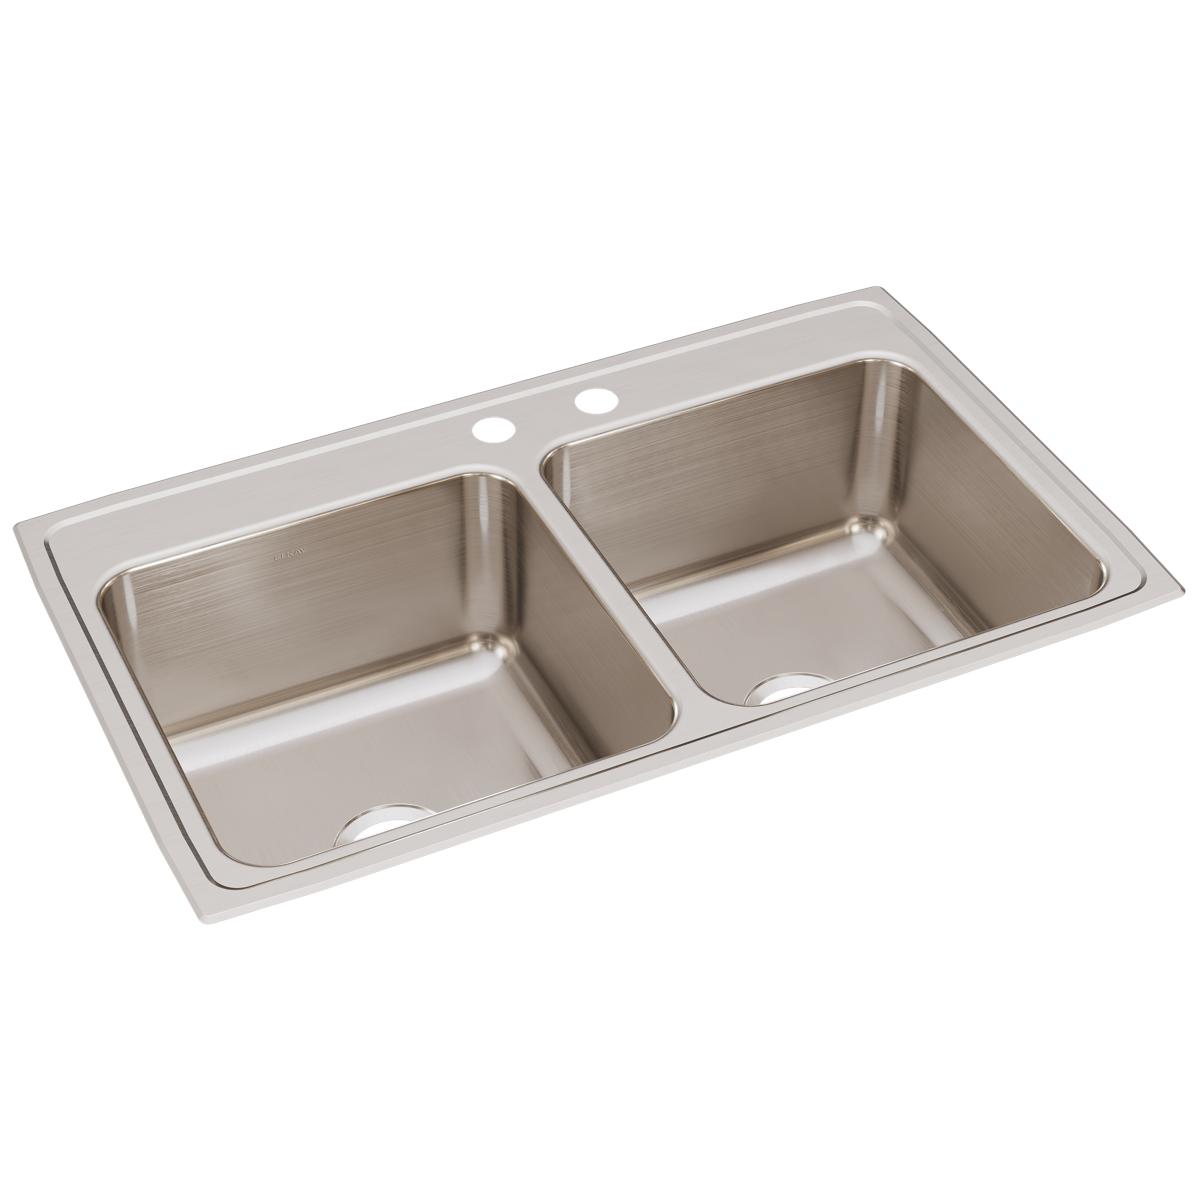 Elkay Lustertone Classic 37" x 22" x 10-1/8" MR2-Hole Equal Double Bowl Drop-in Sink